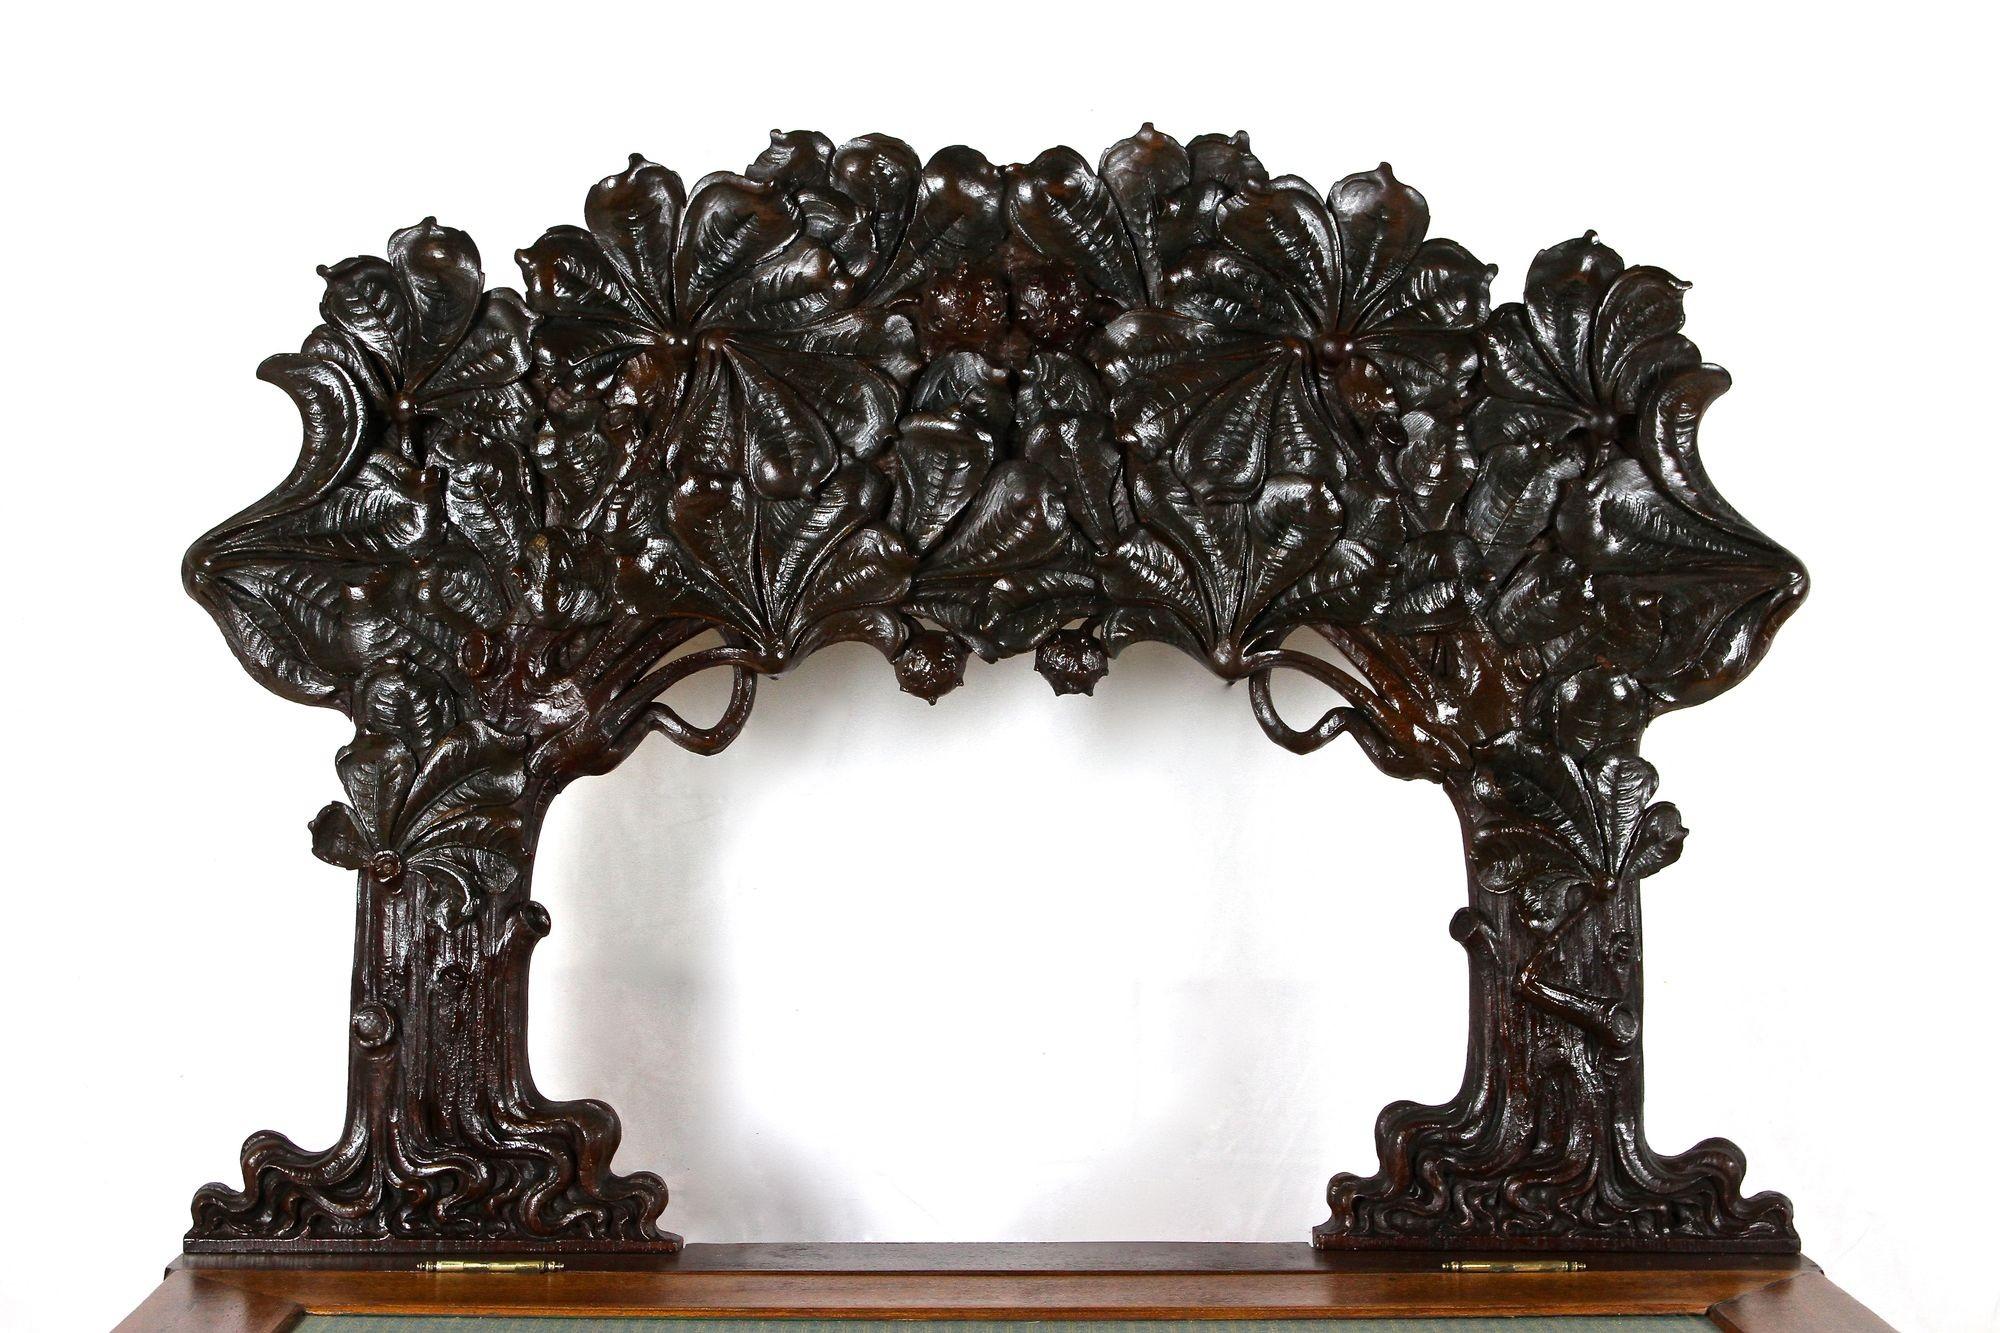 Hand-Carved 19th Century French Chest Bench With Chestnut Tree Motif, France ca. 1890/1900